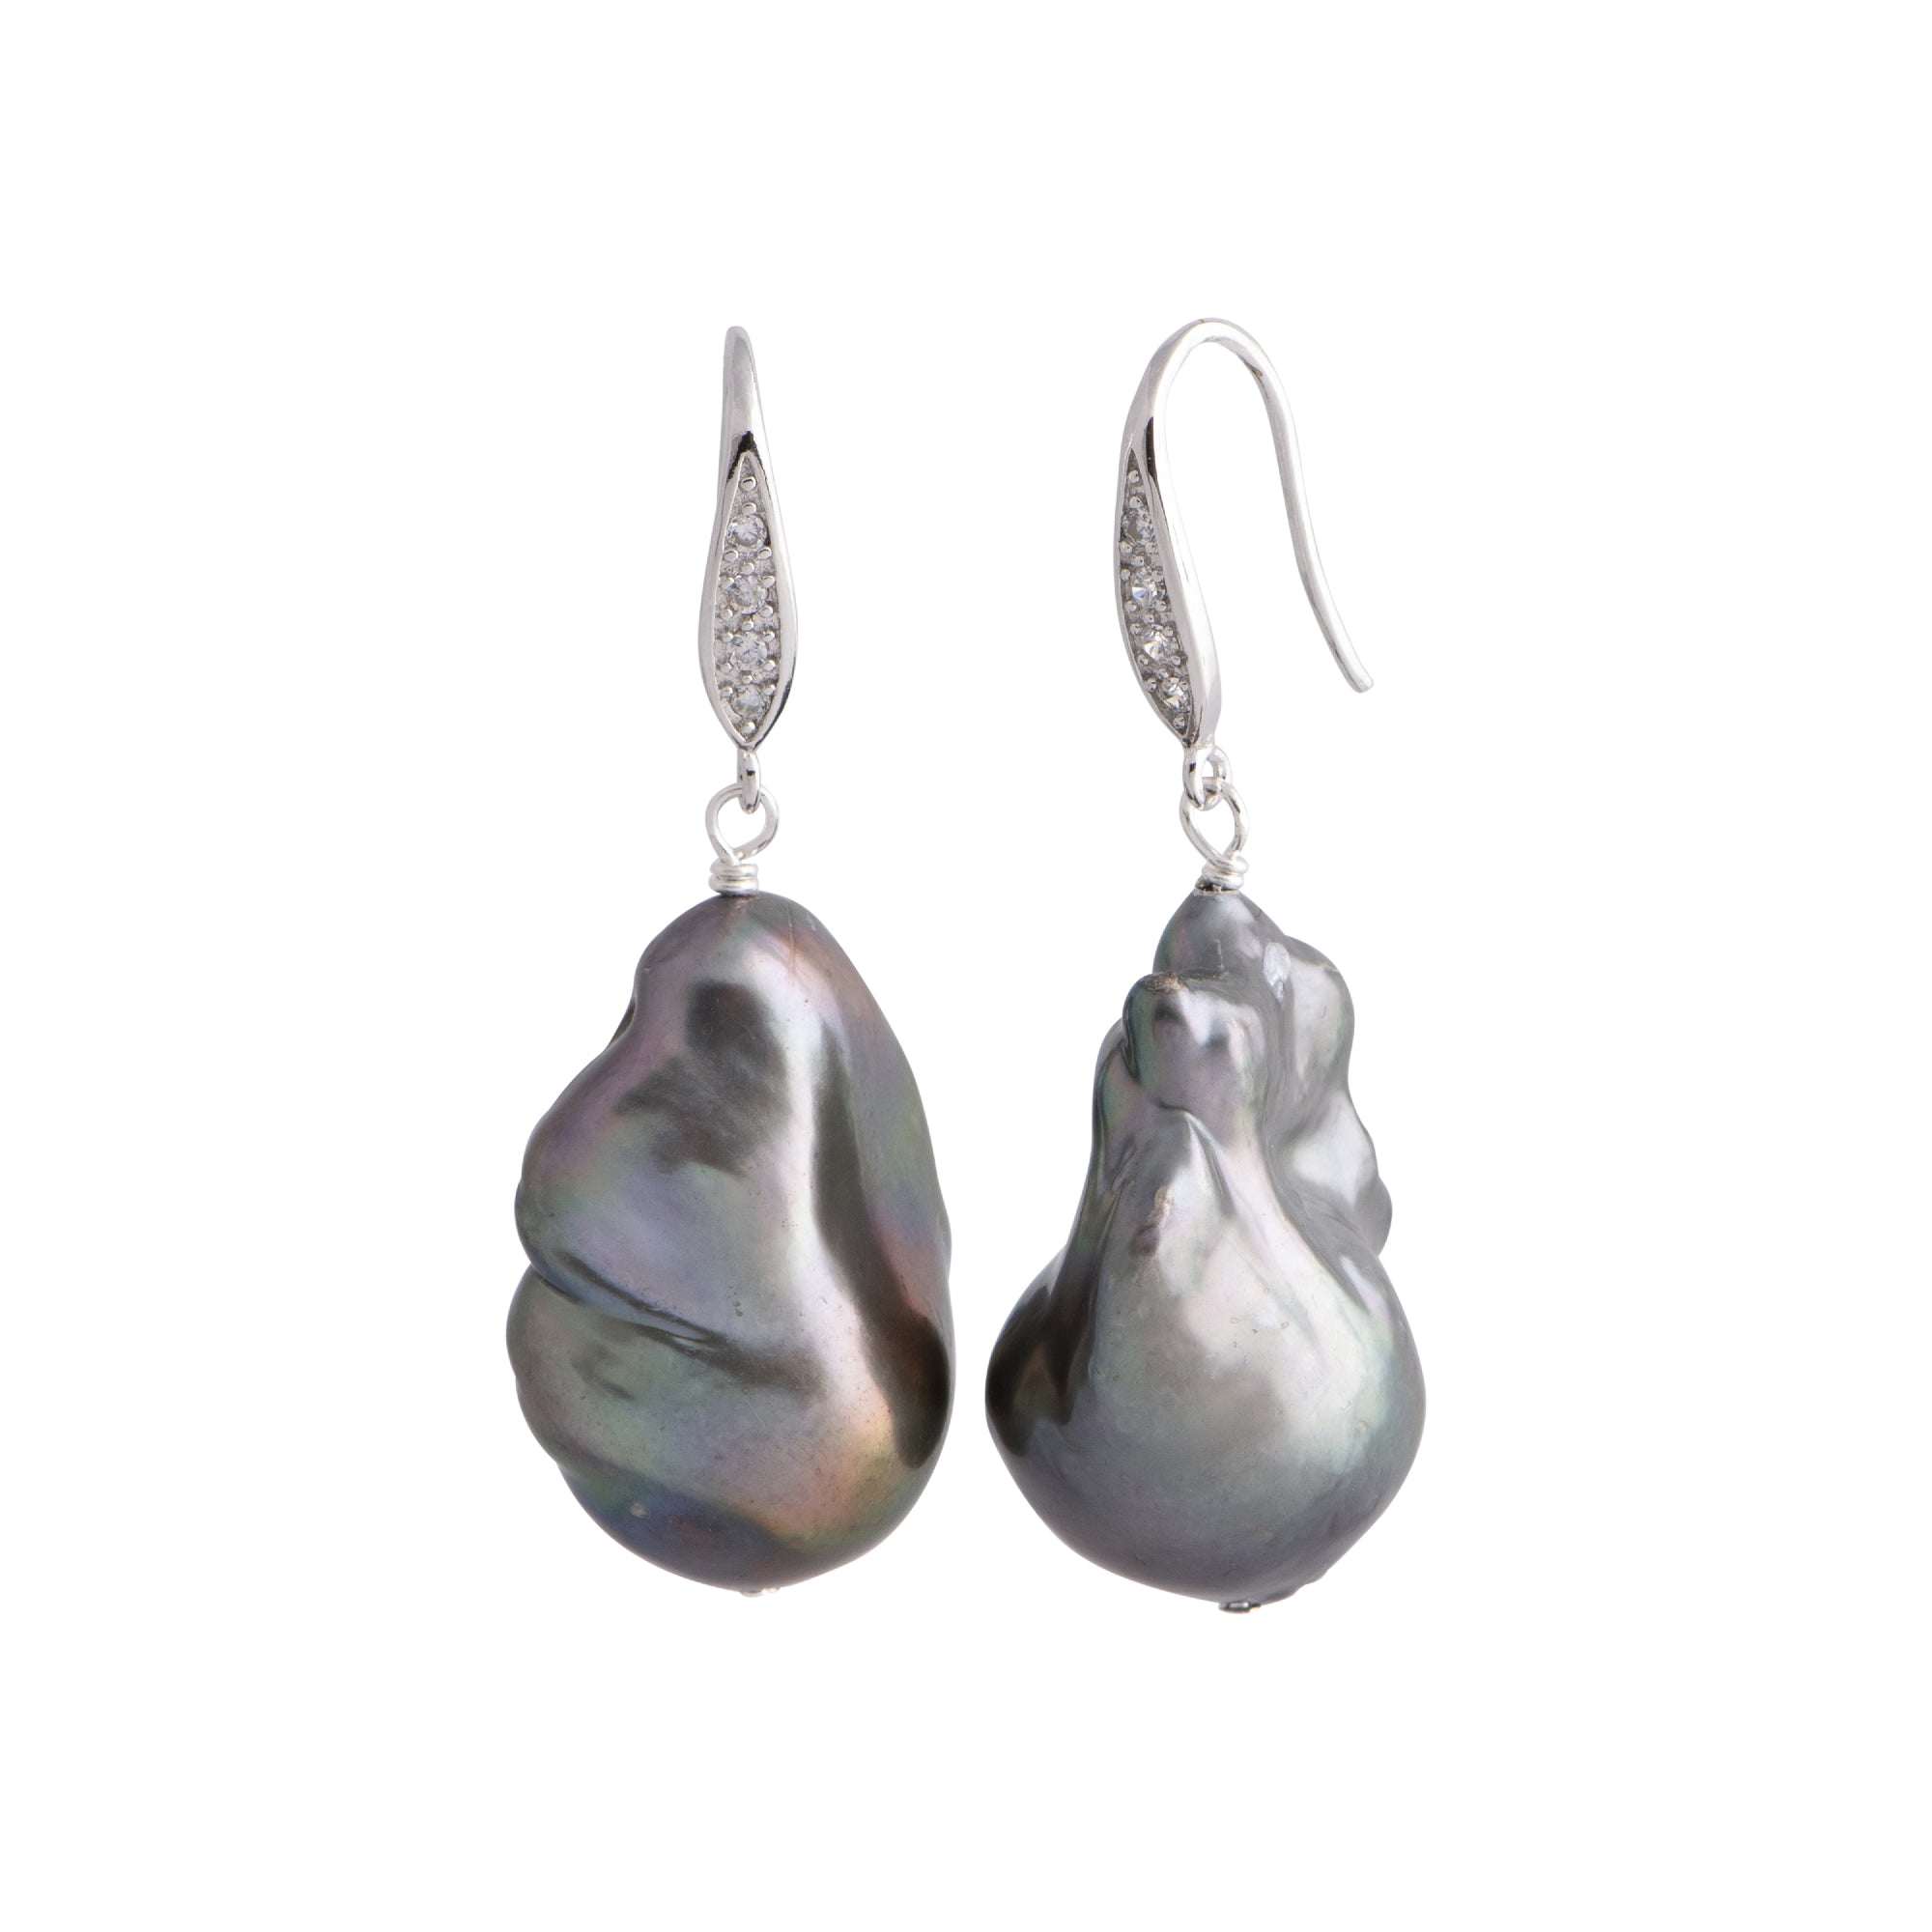 Sterling Silver Dangle Earrings with Grey Cultured Pearls - Exquisite Glam  | NOVICA